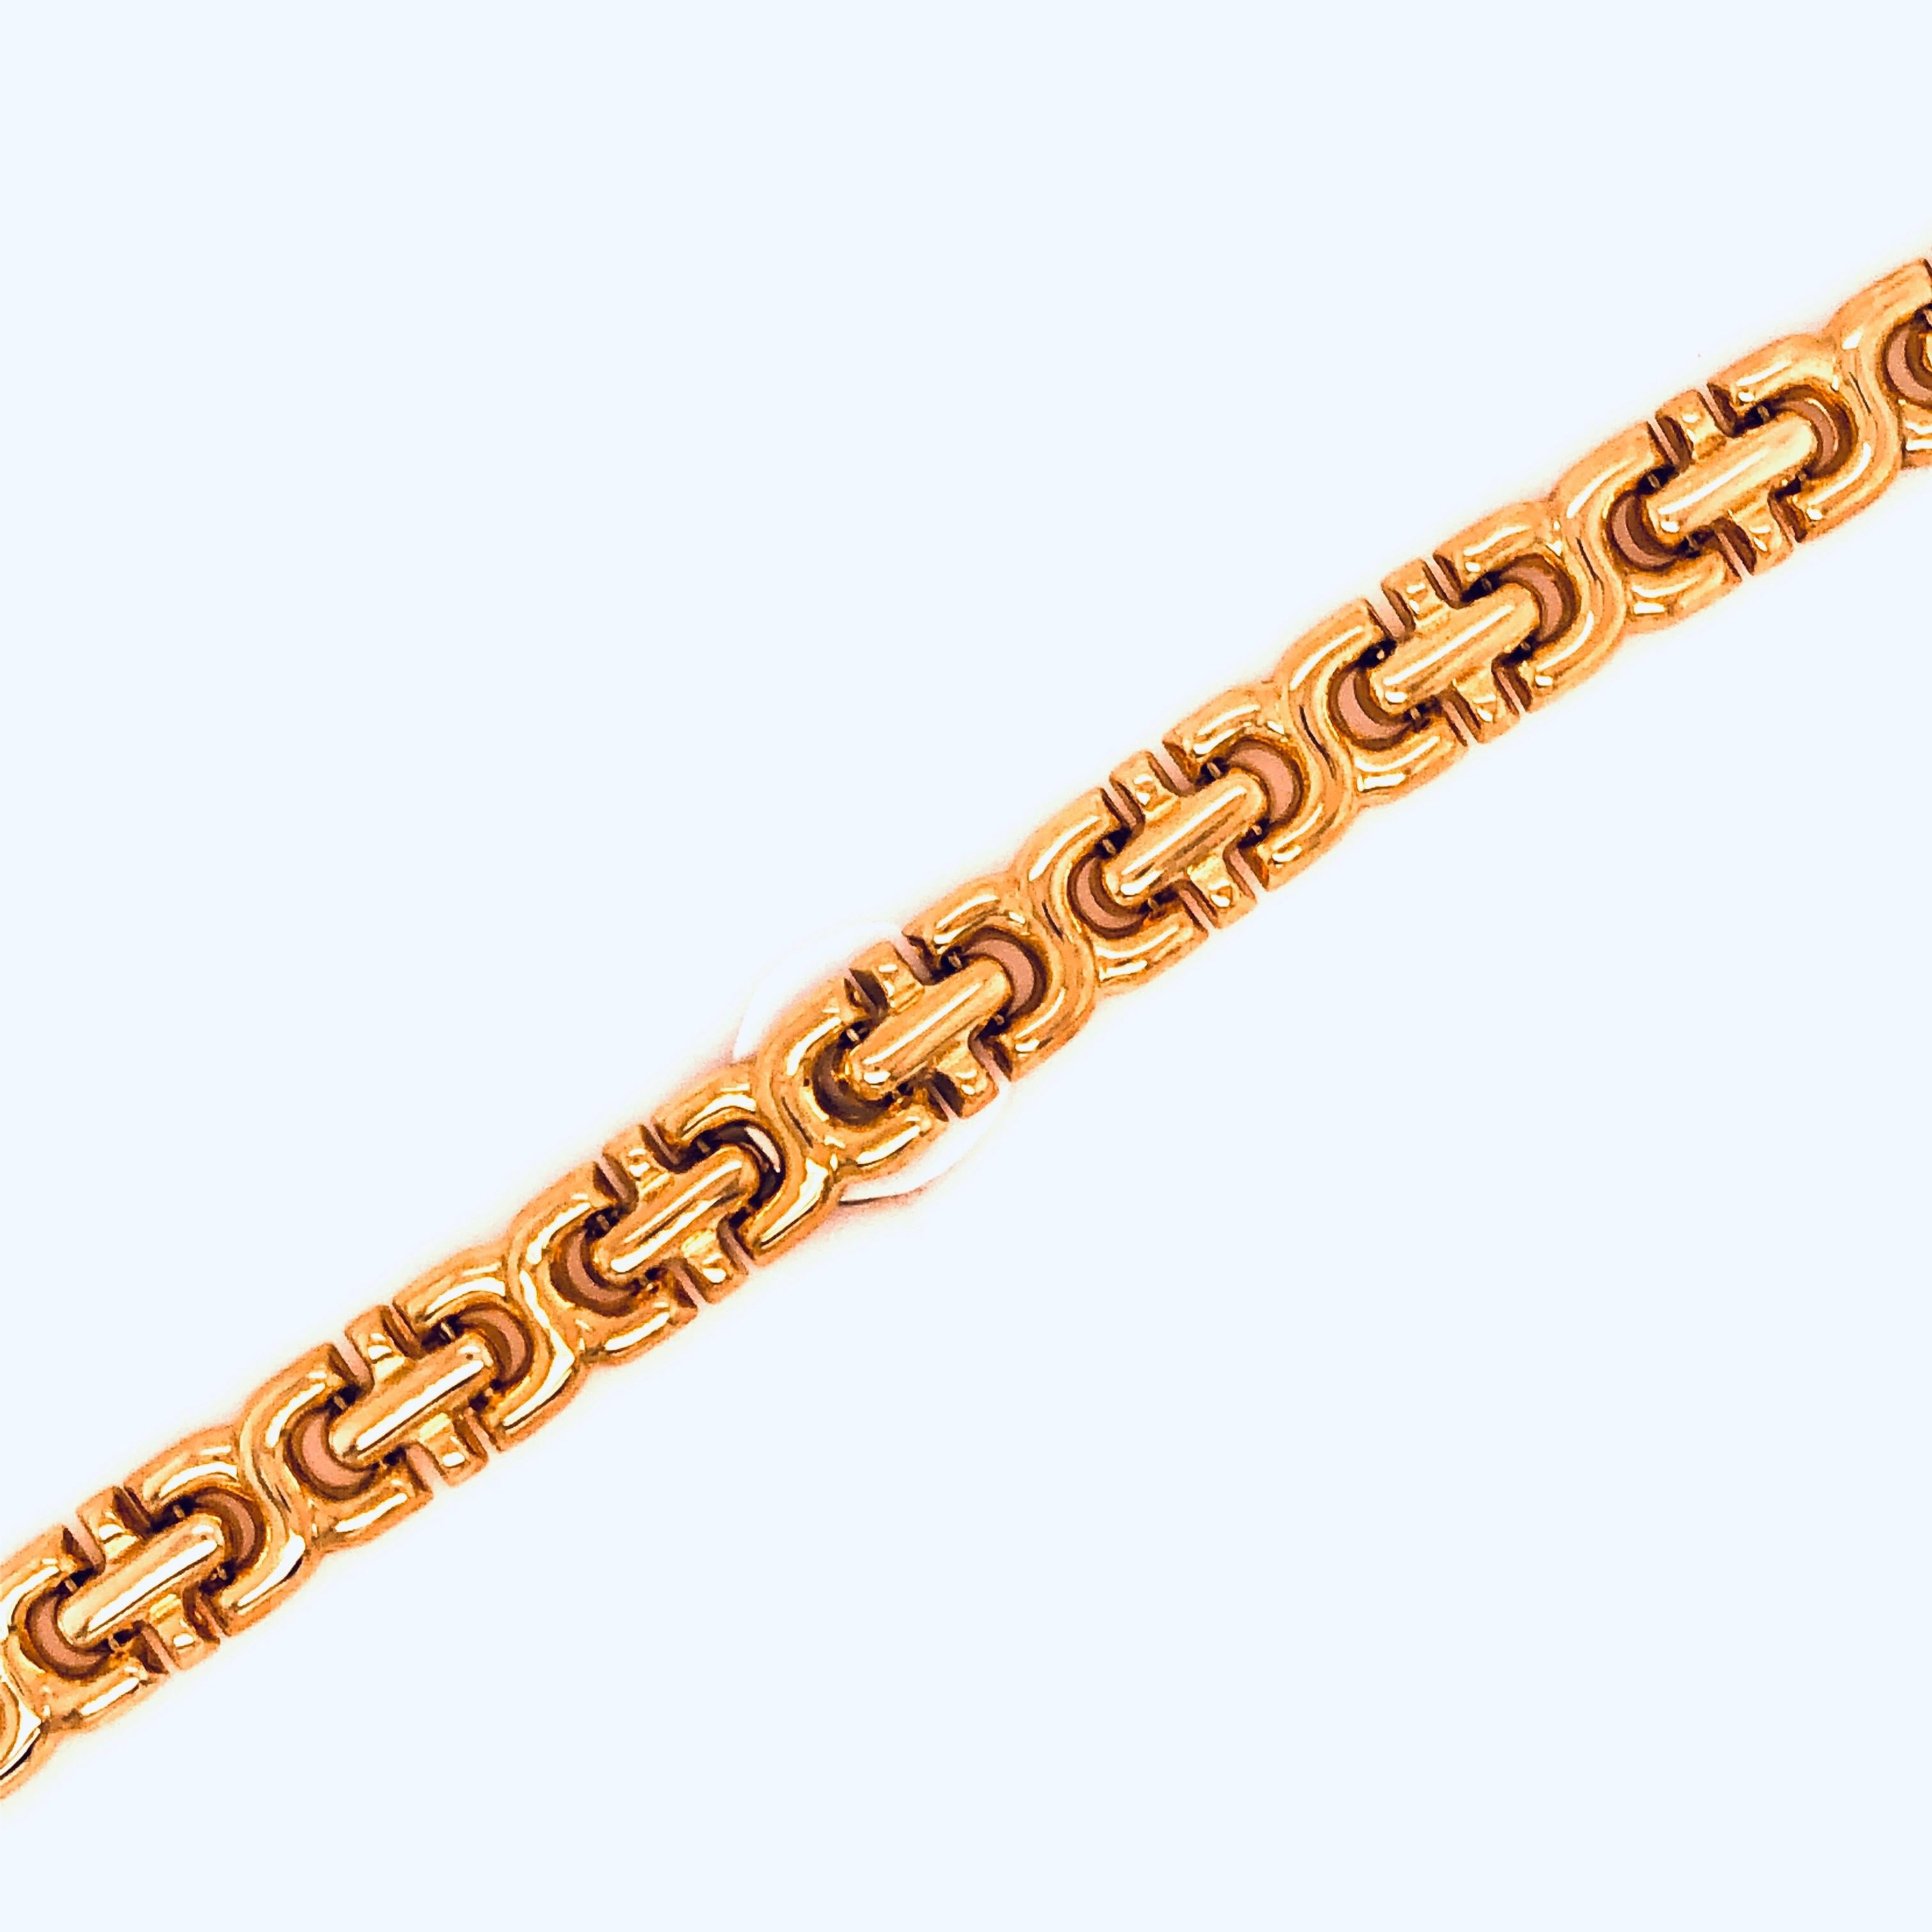 Fancy Link Bracelet 10 Grams In Good Condition For Sale In Stamford, CT